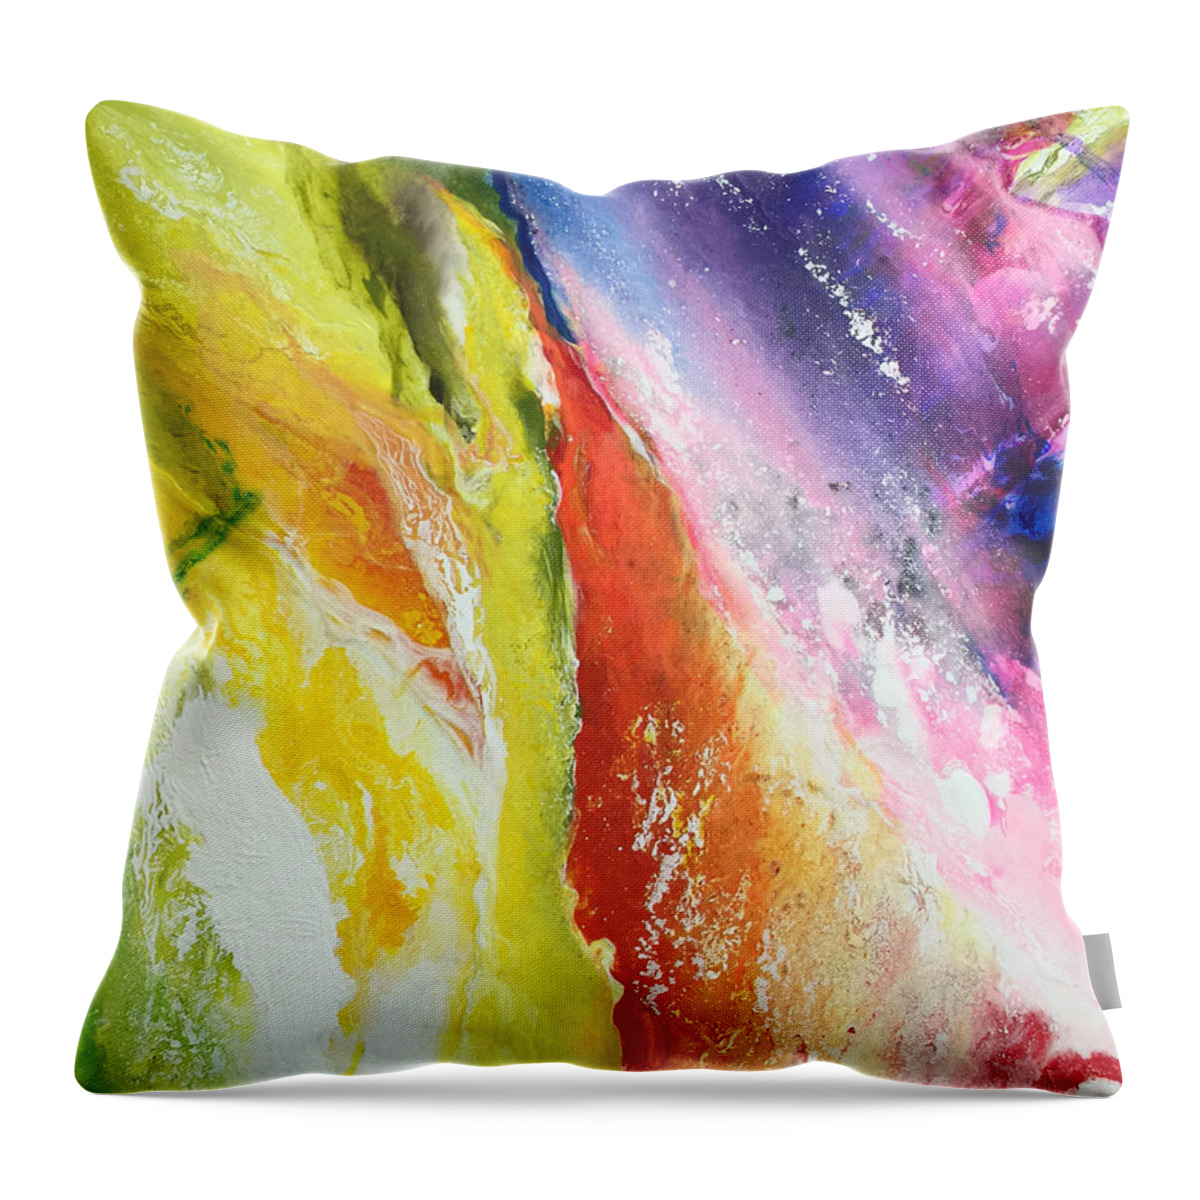 Abstract Throw Pillow featuring the painting Ecstatic by Linda Bailey